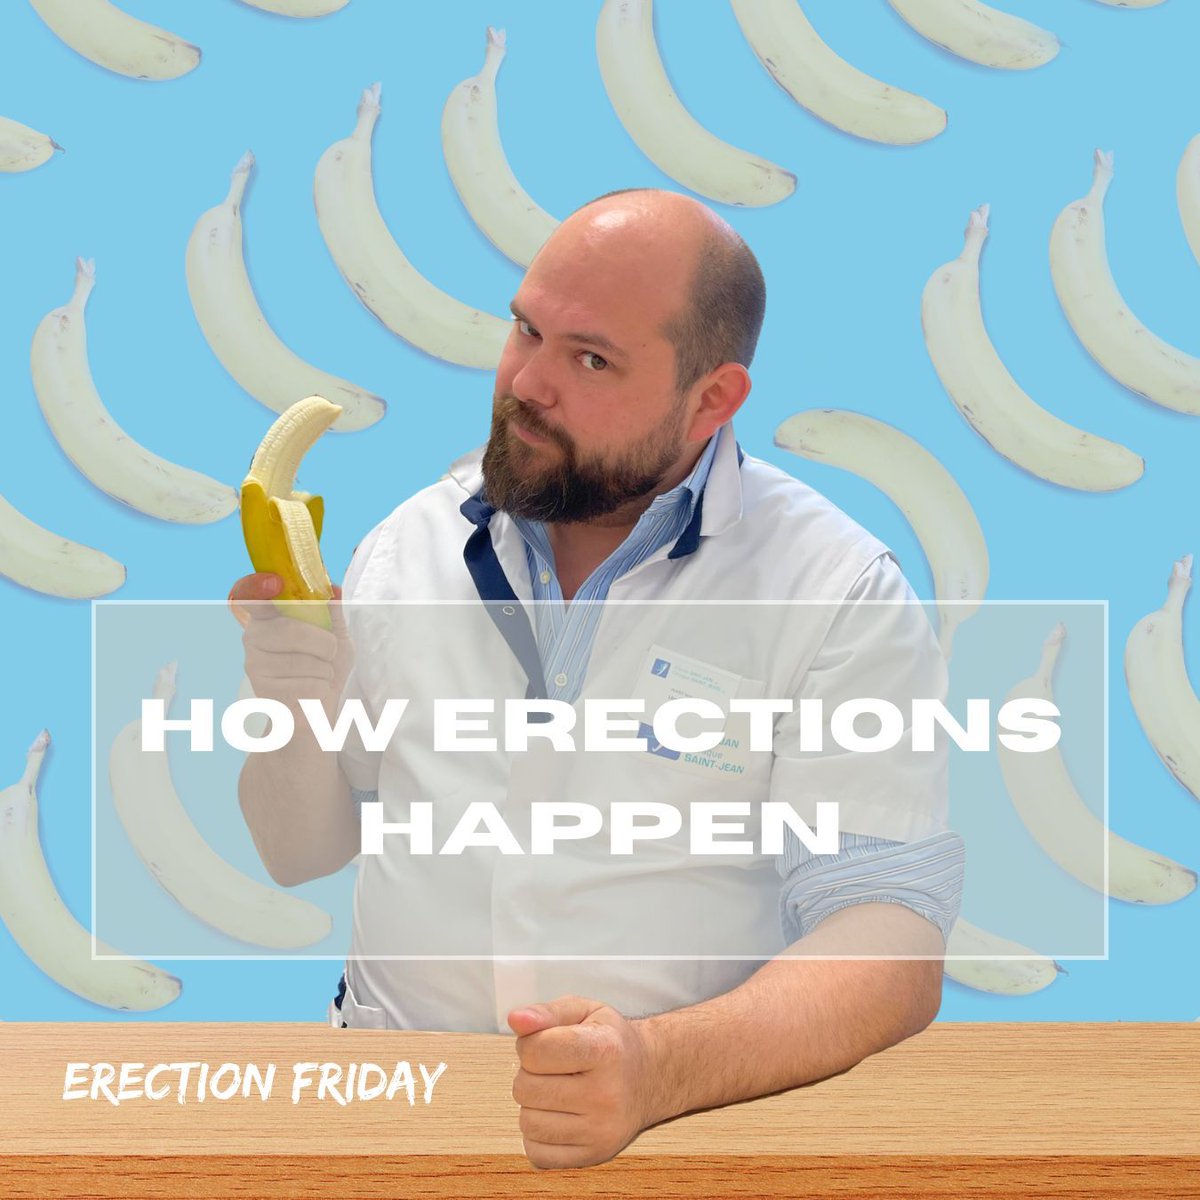 When aroused, brain signals cause blood to flow to the p*nis, leading to enlargment and firmness. If blood leaves the p*nis too quickly, erektile problems can occur. Talk to your GP. Solutions exist. buff.ly/3SUaRgG #erektionfriday #sexeducation #WardOfYourHealth